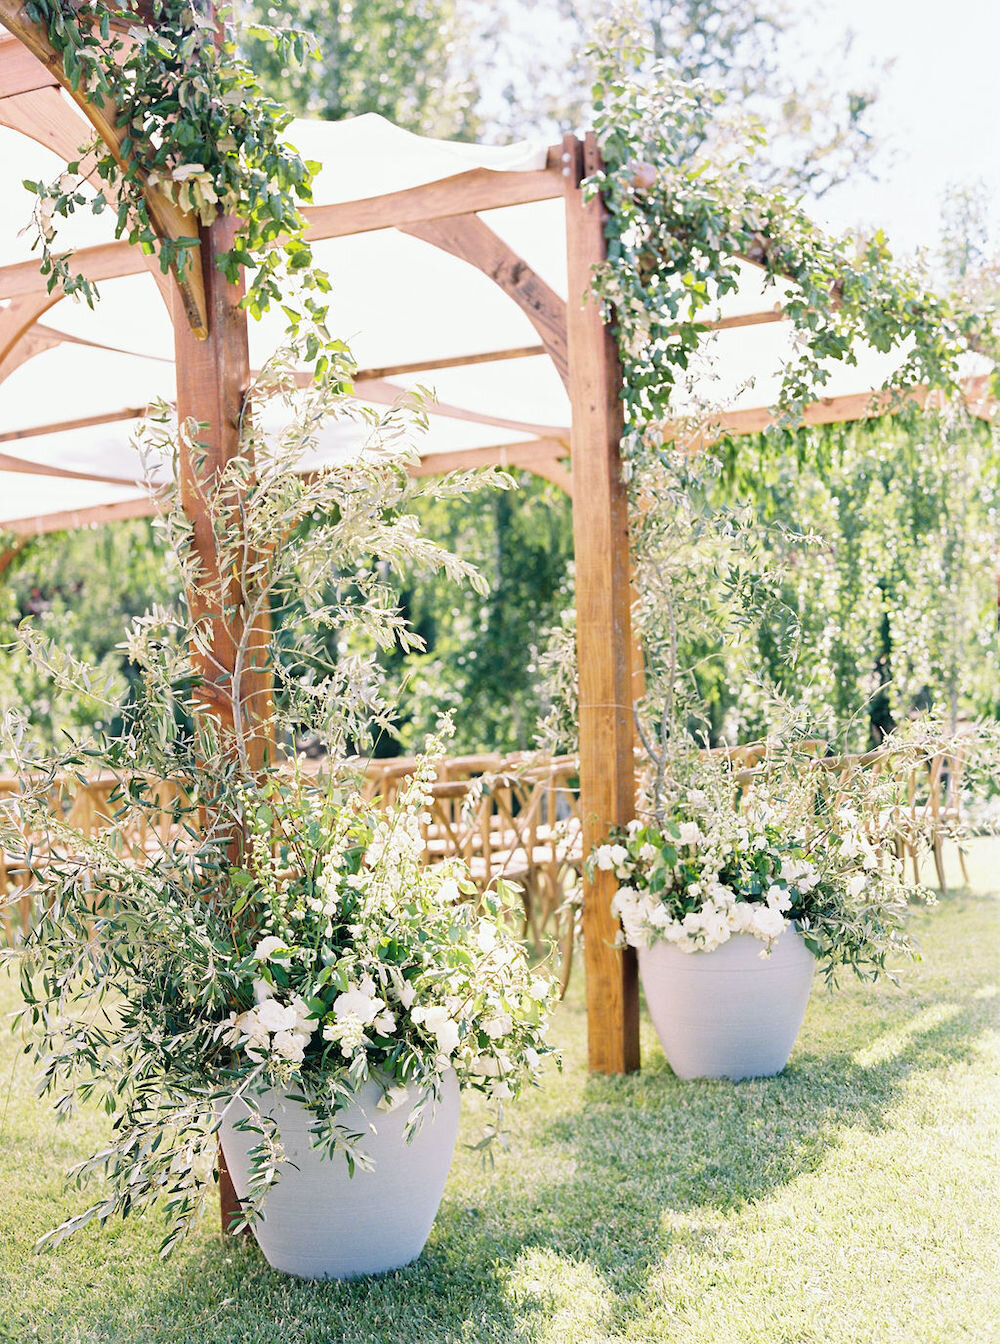  Every guest passed through this portal we adorned with Mediterranean foliage and garden flowers to find their seat. The last person to pass through that same portal? The bride herself.   Photo by Ashley Sawtelle. Event Design by Bash Please. As see 